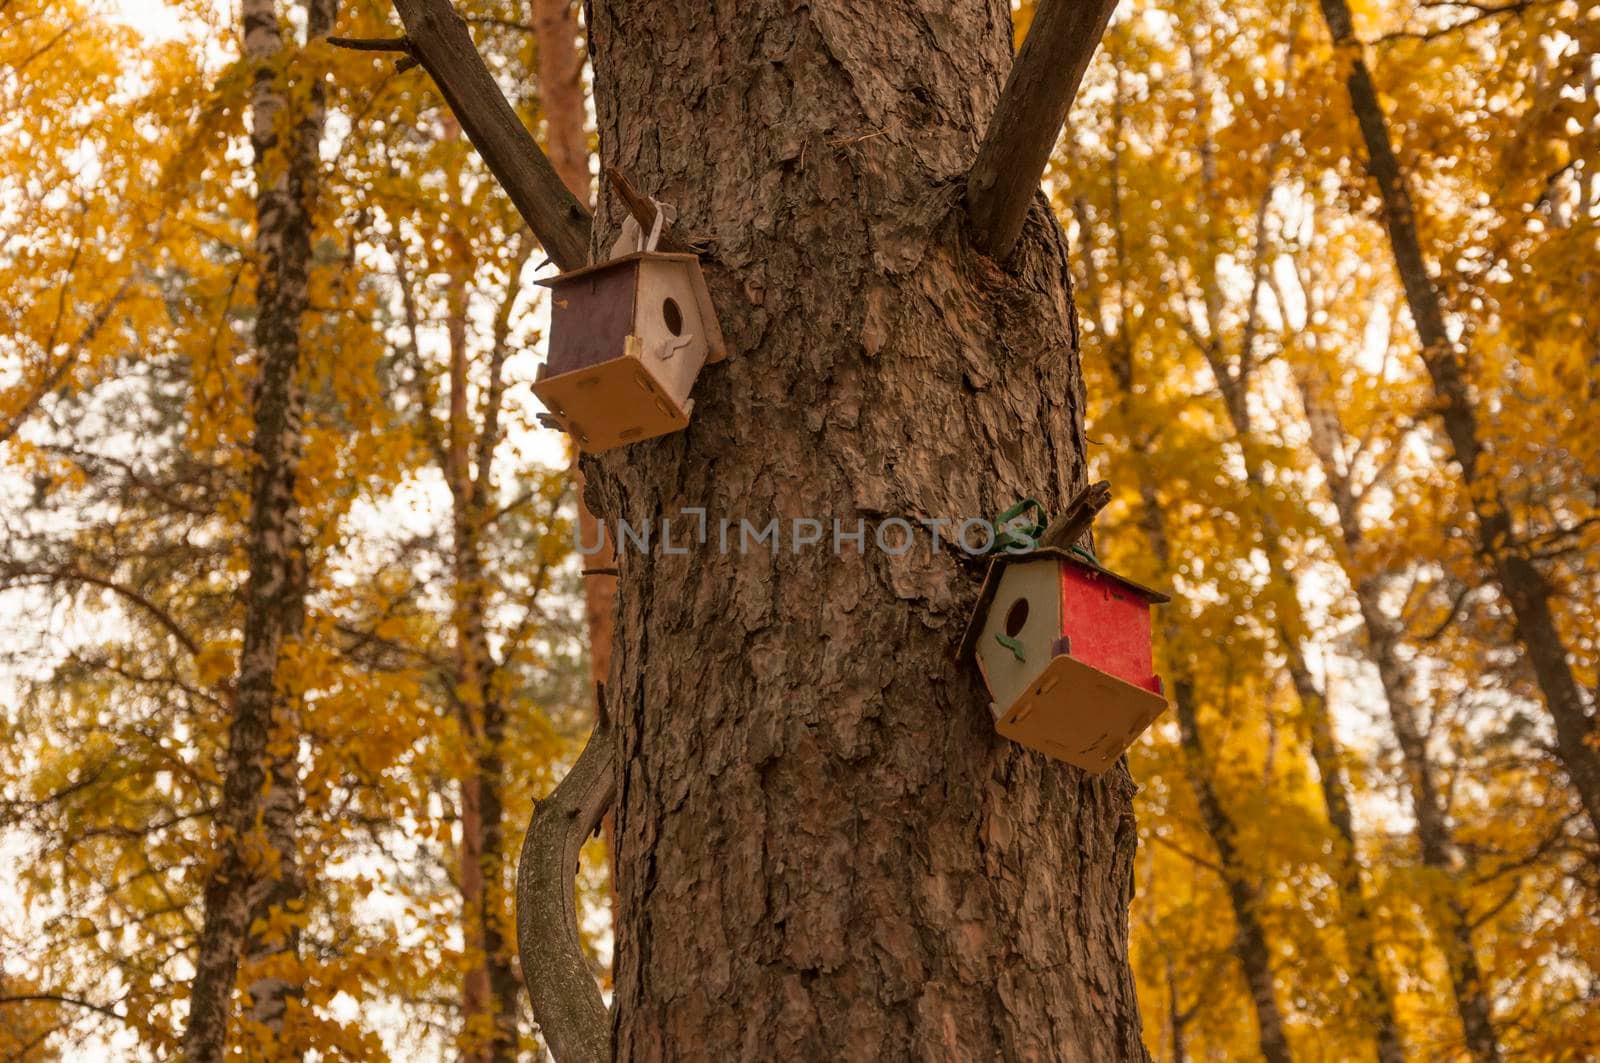 Feeders for birds in the city park by inxti